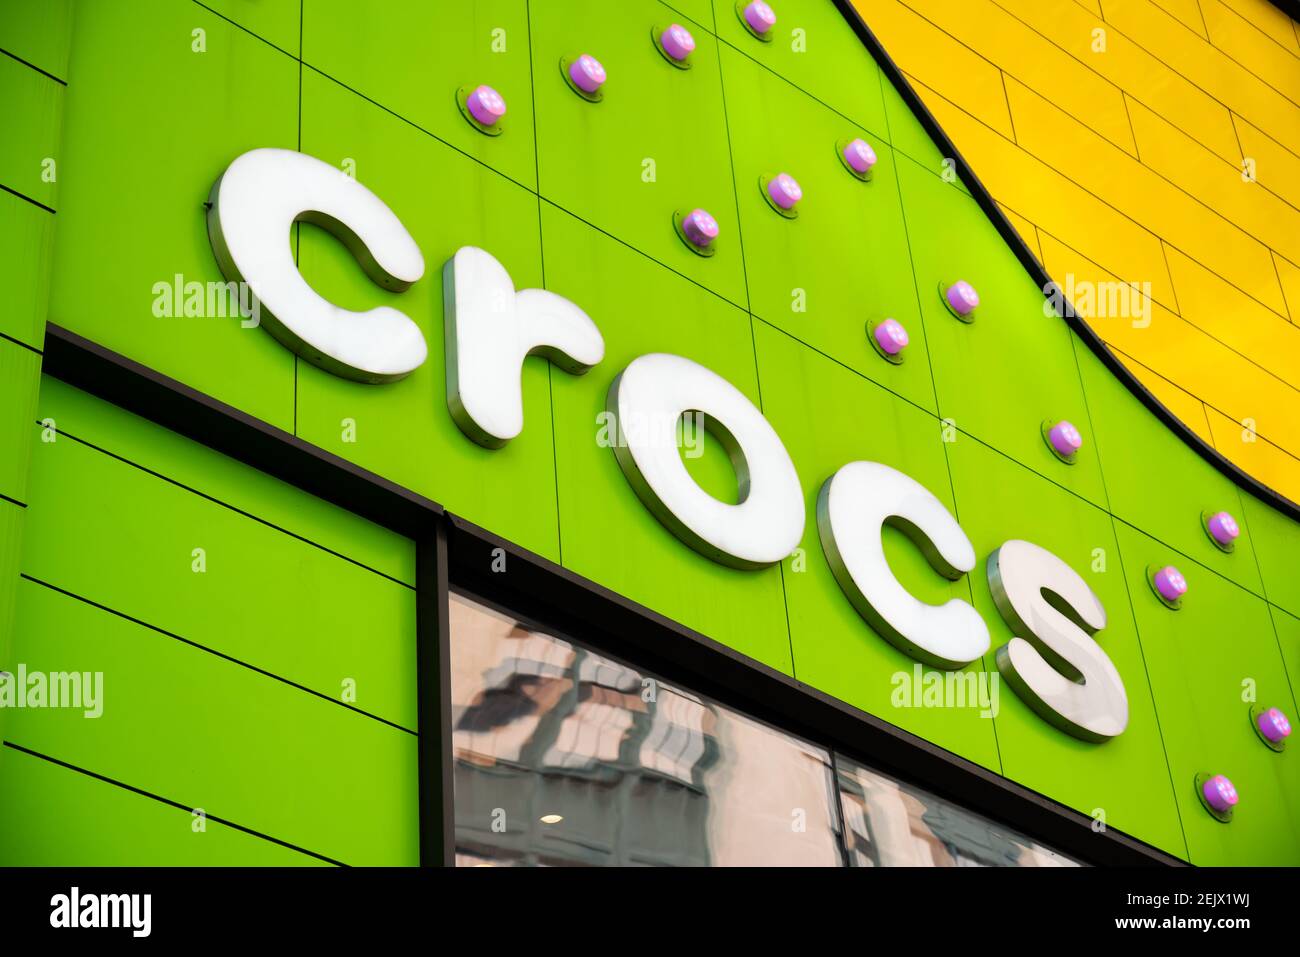 American foam clog shoes company, Crocs store and logo seen in New York  City. (Photo by Alex Tai / SOPA Images/Sipa USA Stock Photo - Alamy